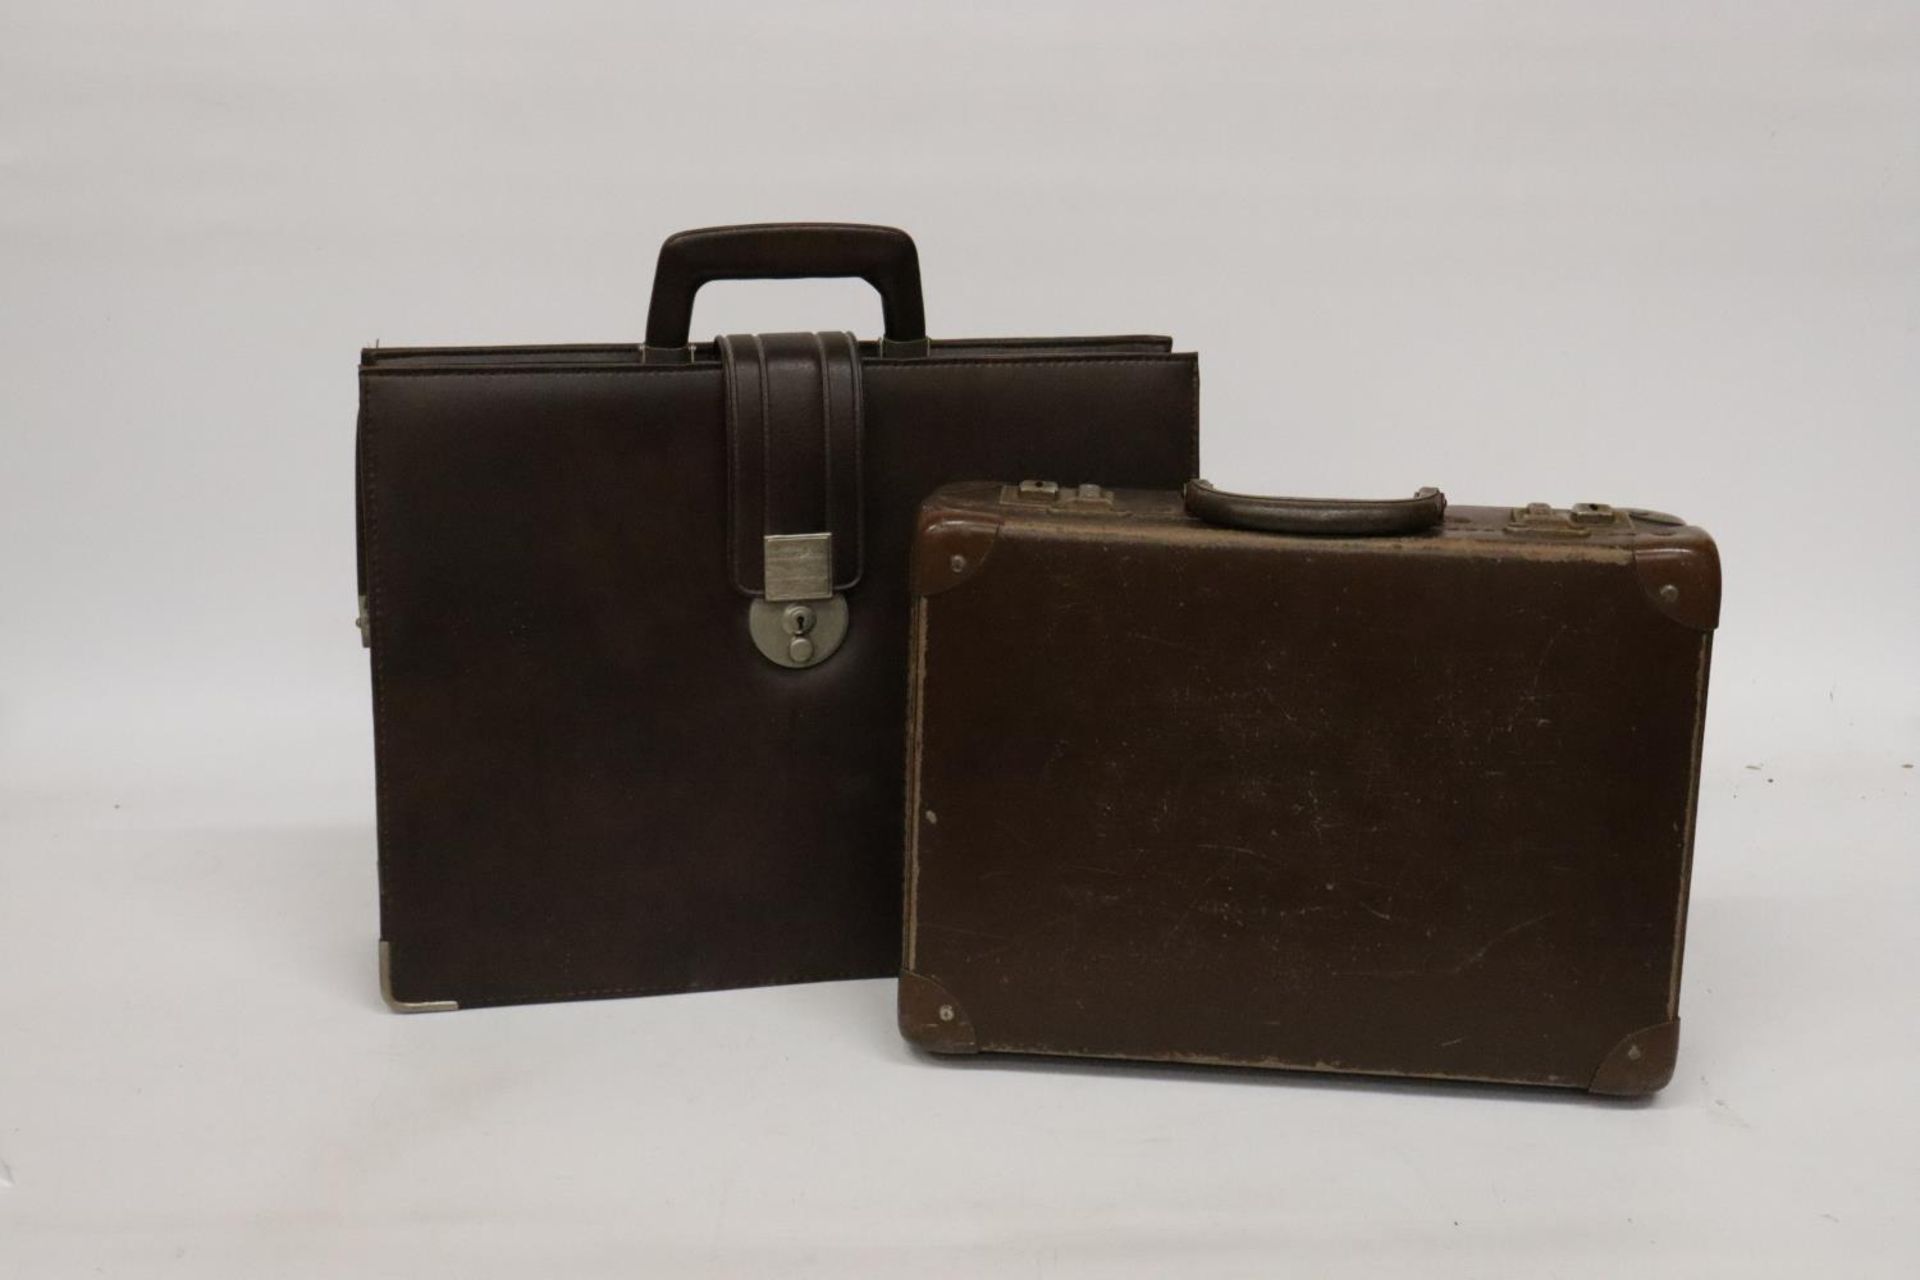 TWO VINTAGE LEATHER BRIEFCASES - Image 2 of 6